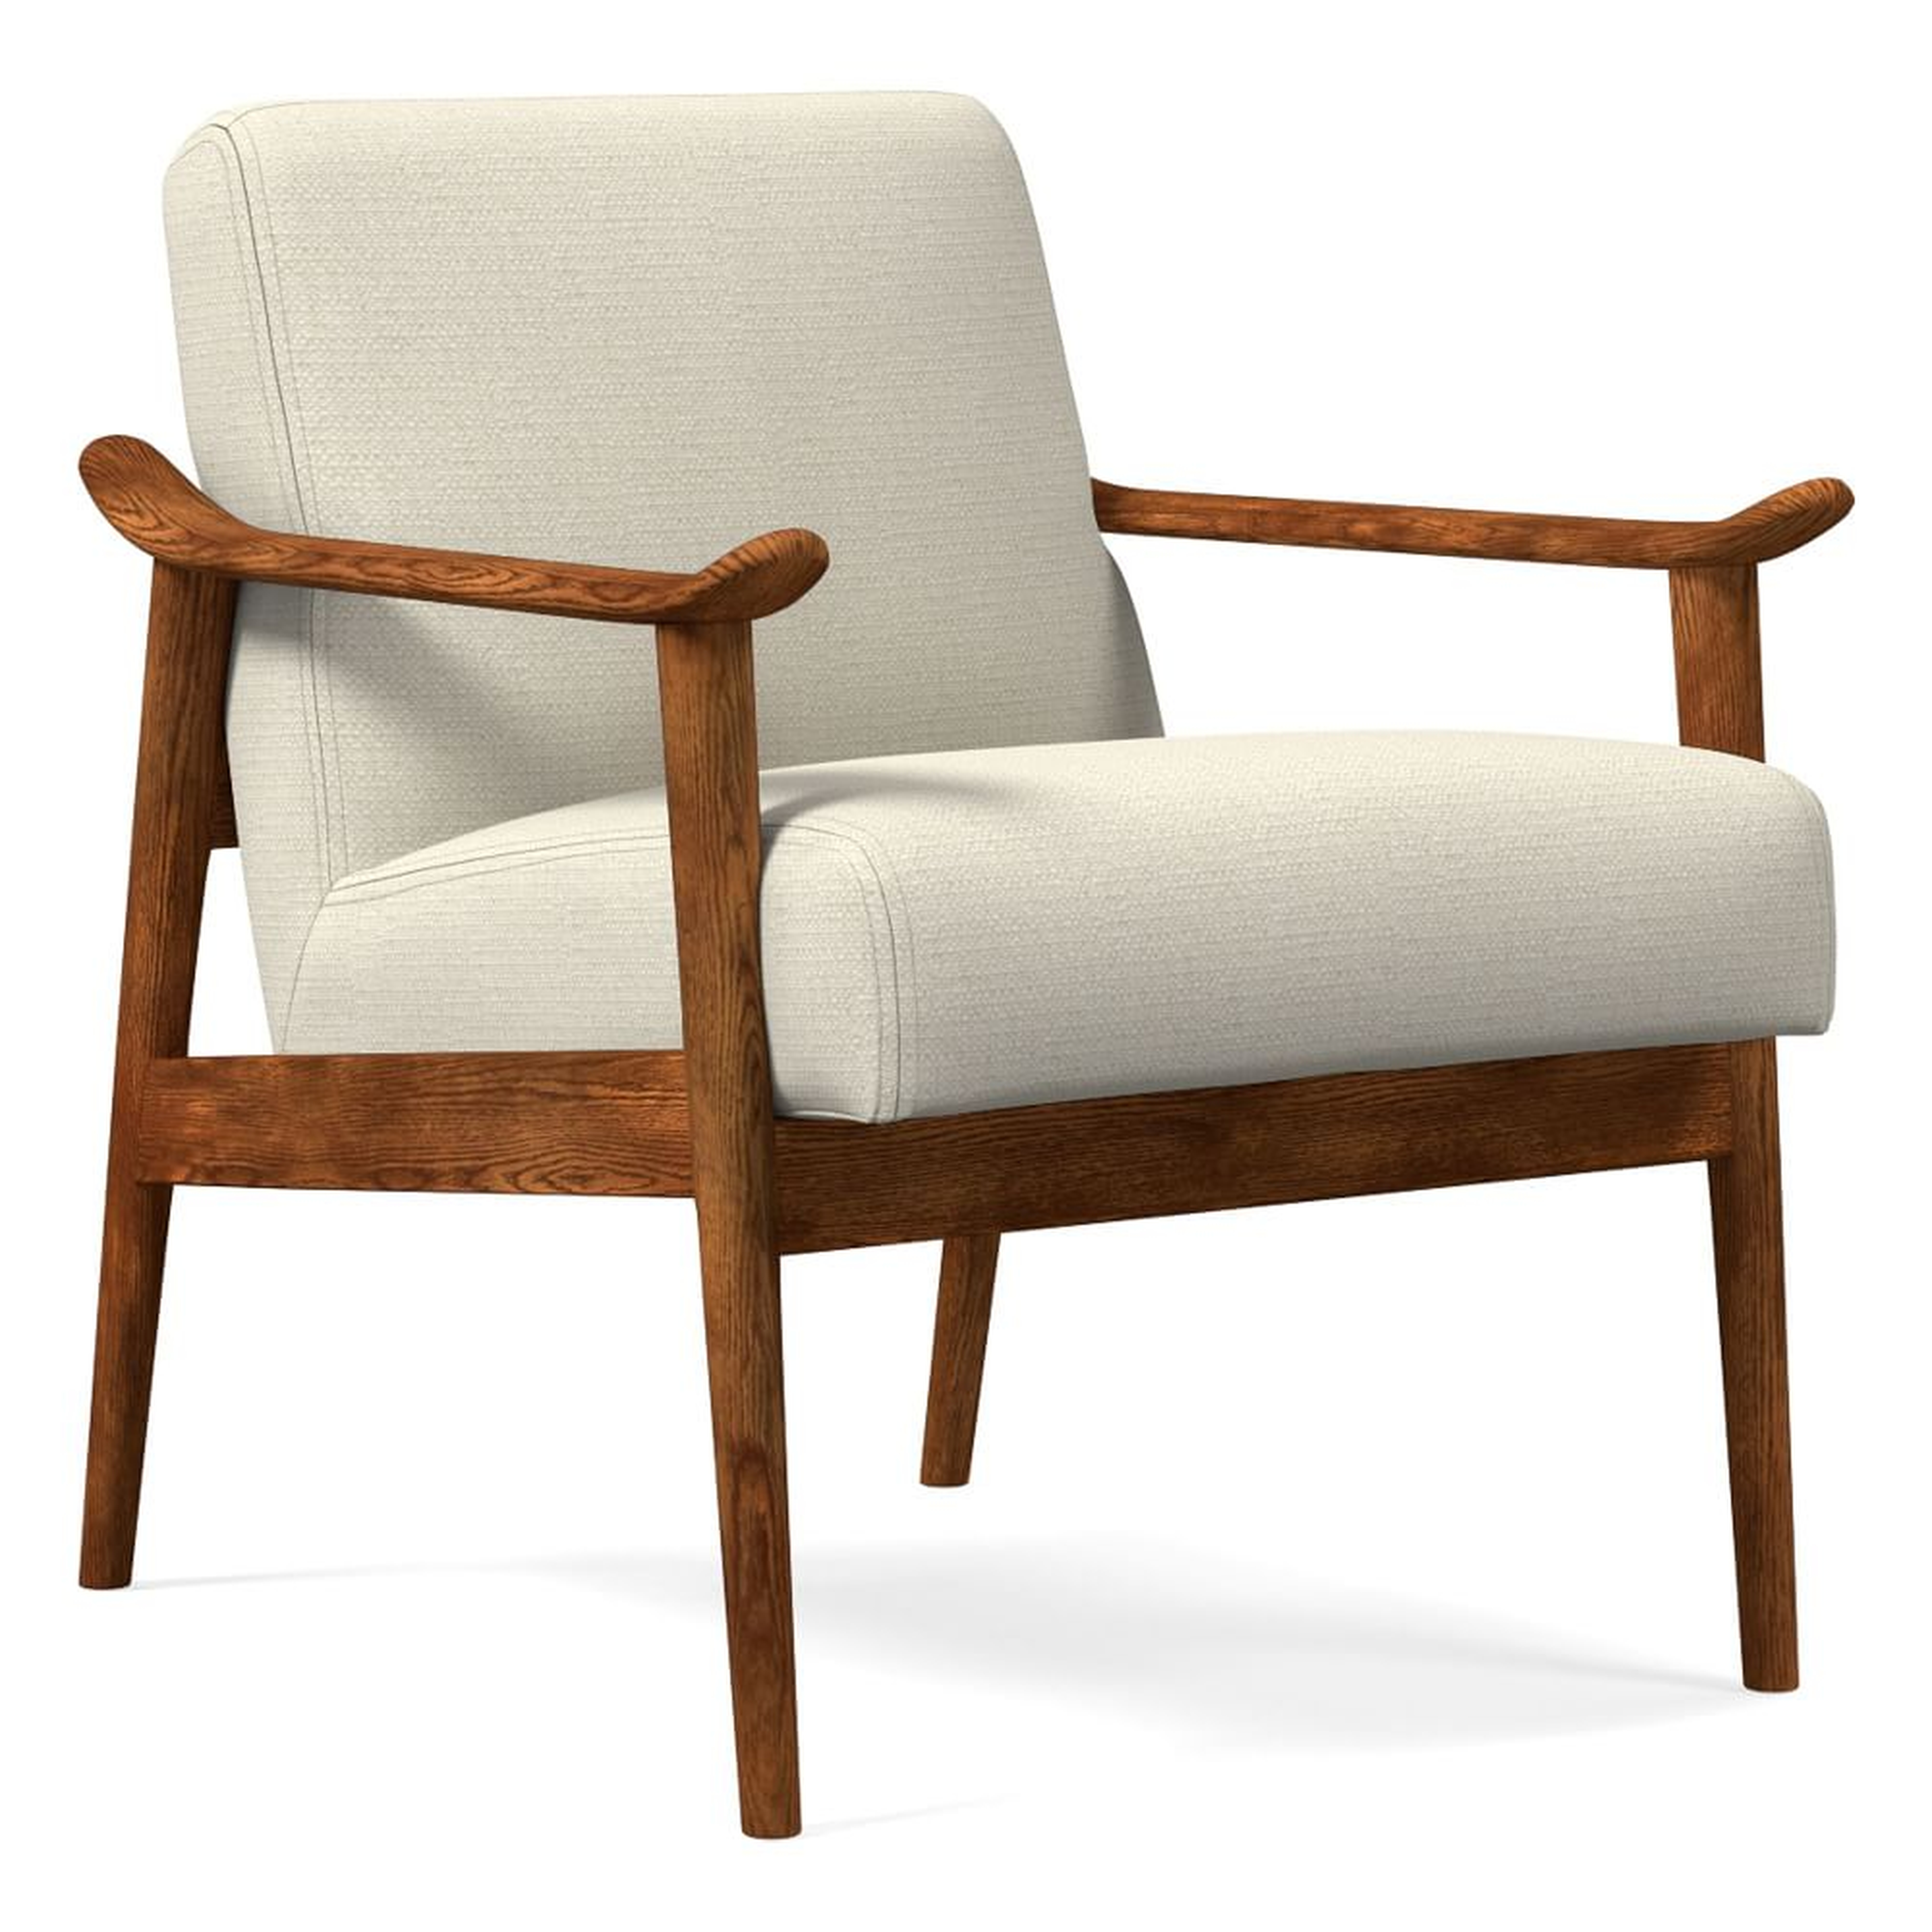 Set of 2: Midcentury Show Wood Chair, Poly, Yarn Dyed Linen Weave, Alabaster, Pecan - West Elm